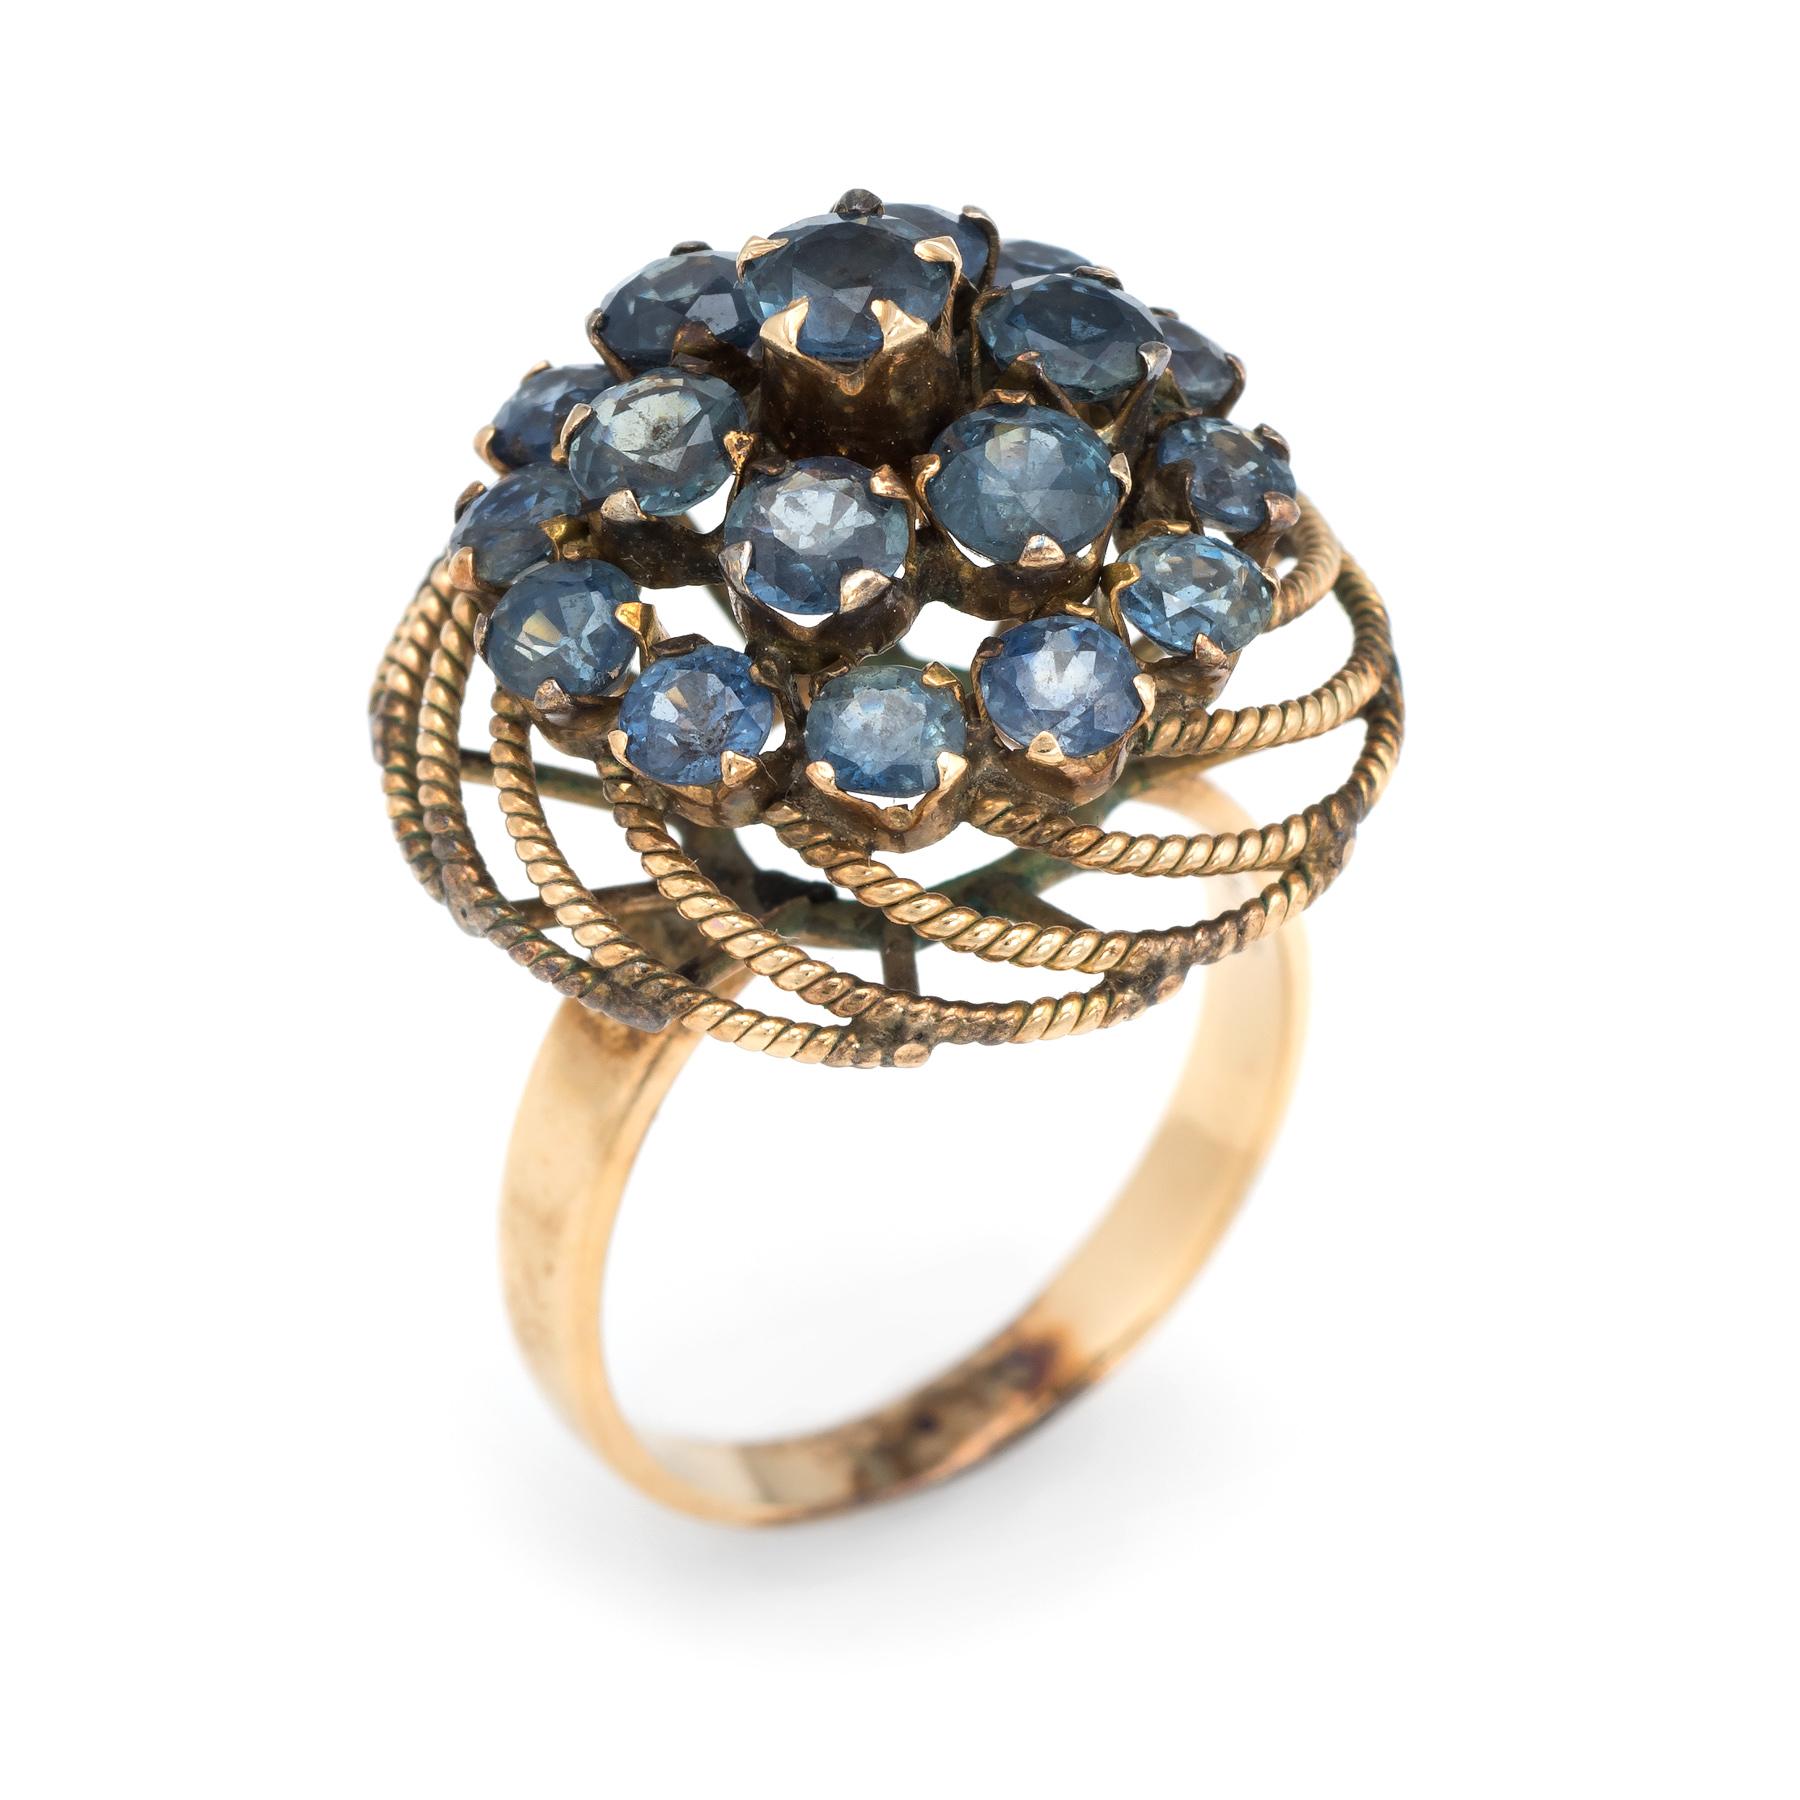 Finely detailed vintage harem cocktail ring (circa 1960s to 1970s), crafted in 14 karat yellow gold. 

18 faceted round cut blue sapphires measure 3.5mm each (average), estimated at 0.15 carats each. The total sapphire weight is estimated at 2.70